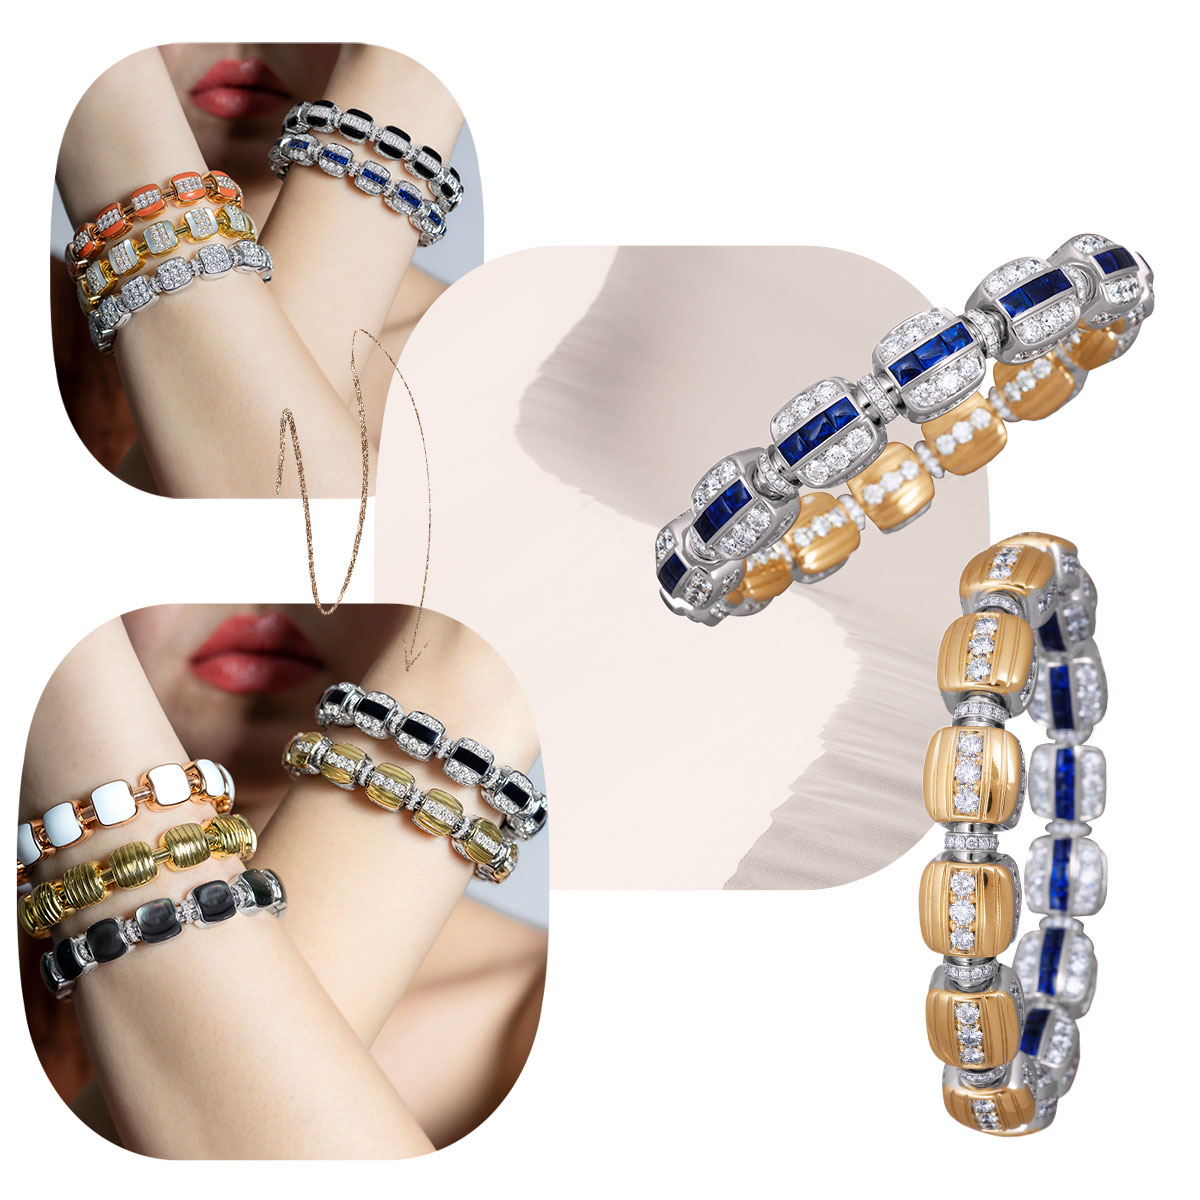 PICCHIOTTI Xpandable Reversible bracelet featuring gold and diamonds on one side and sapphires and diamonds on the flip side, model wearing stacks of Xpandable Reversible bracelets – note: both model images show the same bracelets, featuring both sides in the same order top to bottom.